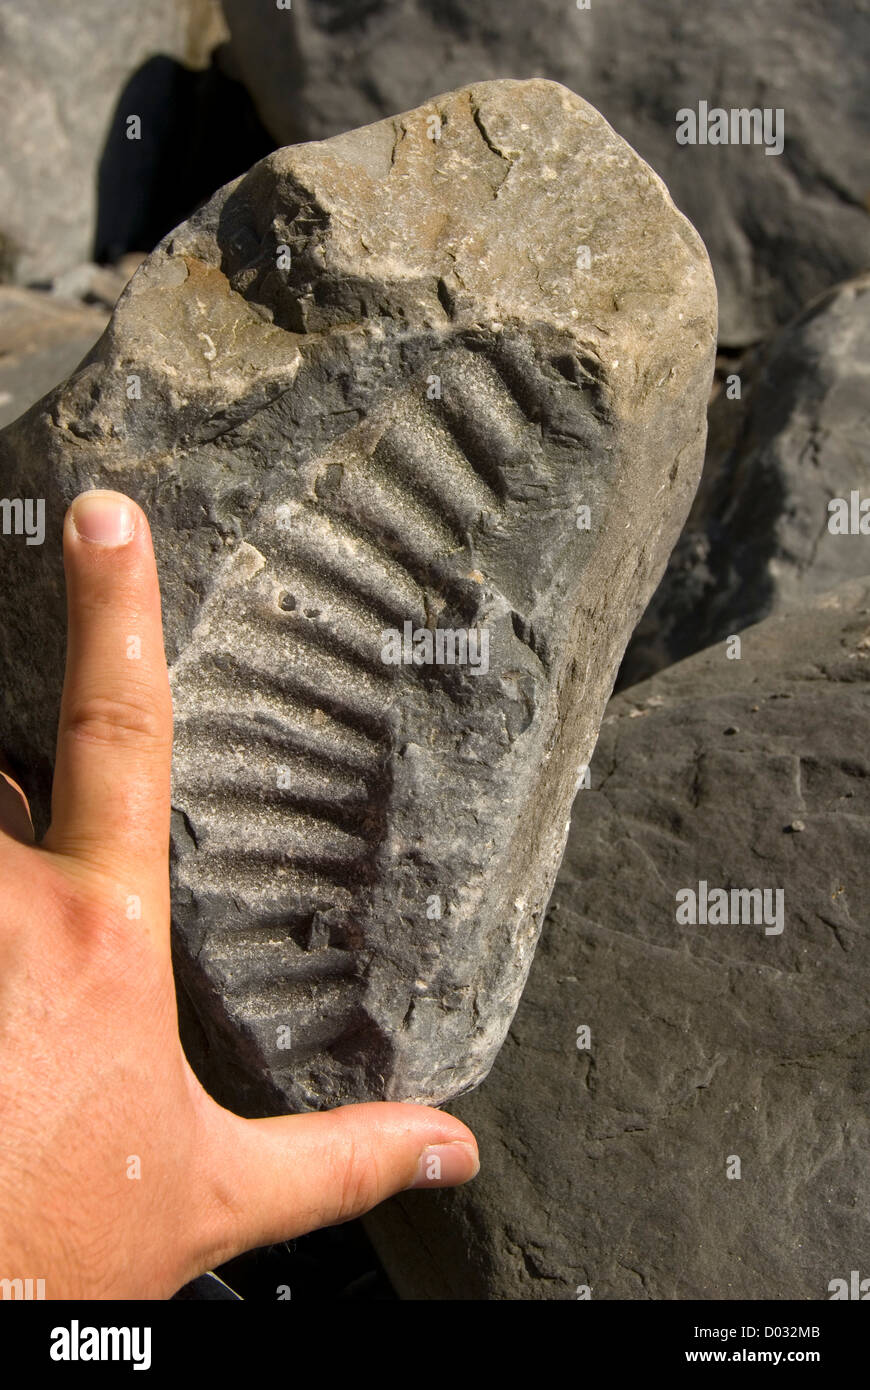 Ammonite fossil at beach, hand to give a sense of scale, Nash Point, Glamorgan Heritage Coast, Wales, United Kingdom, Europe Stock Photo